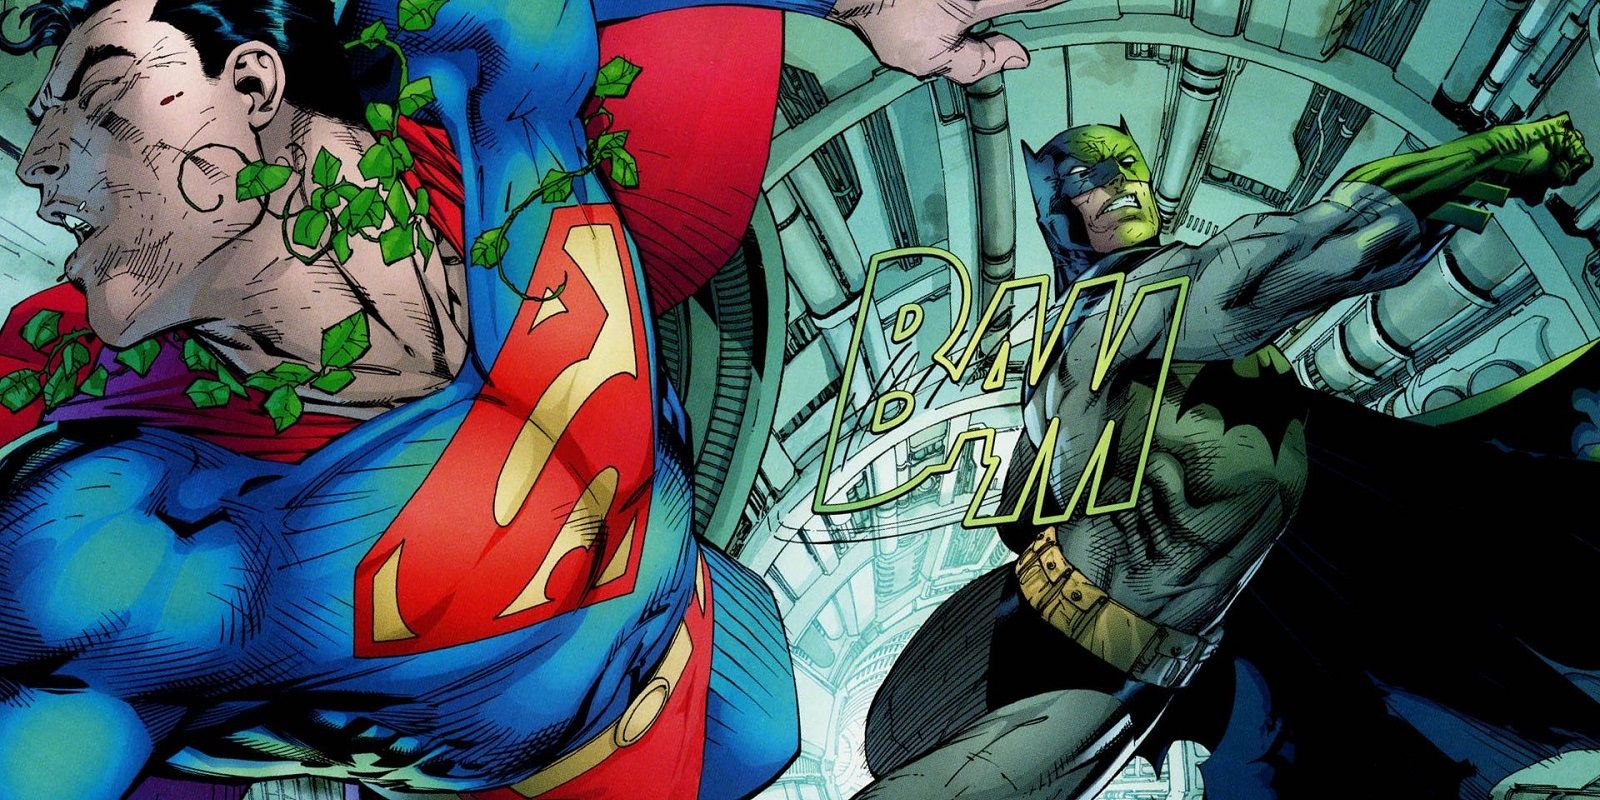 Batman punches Superman with a Kryptonite ring